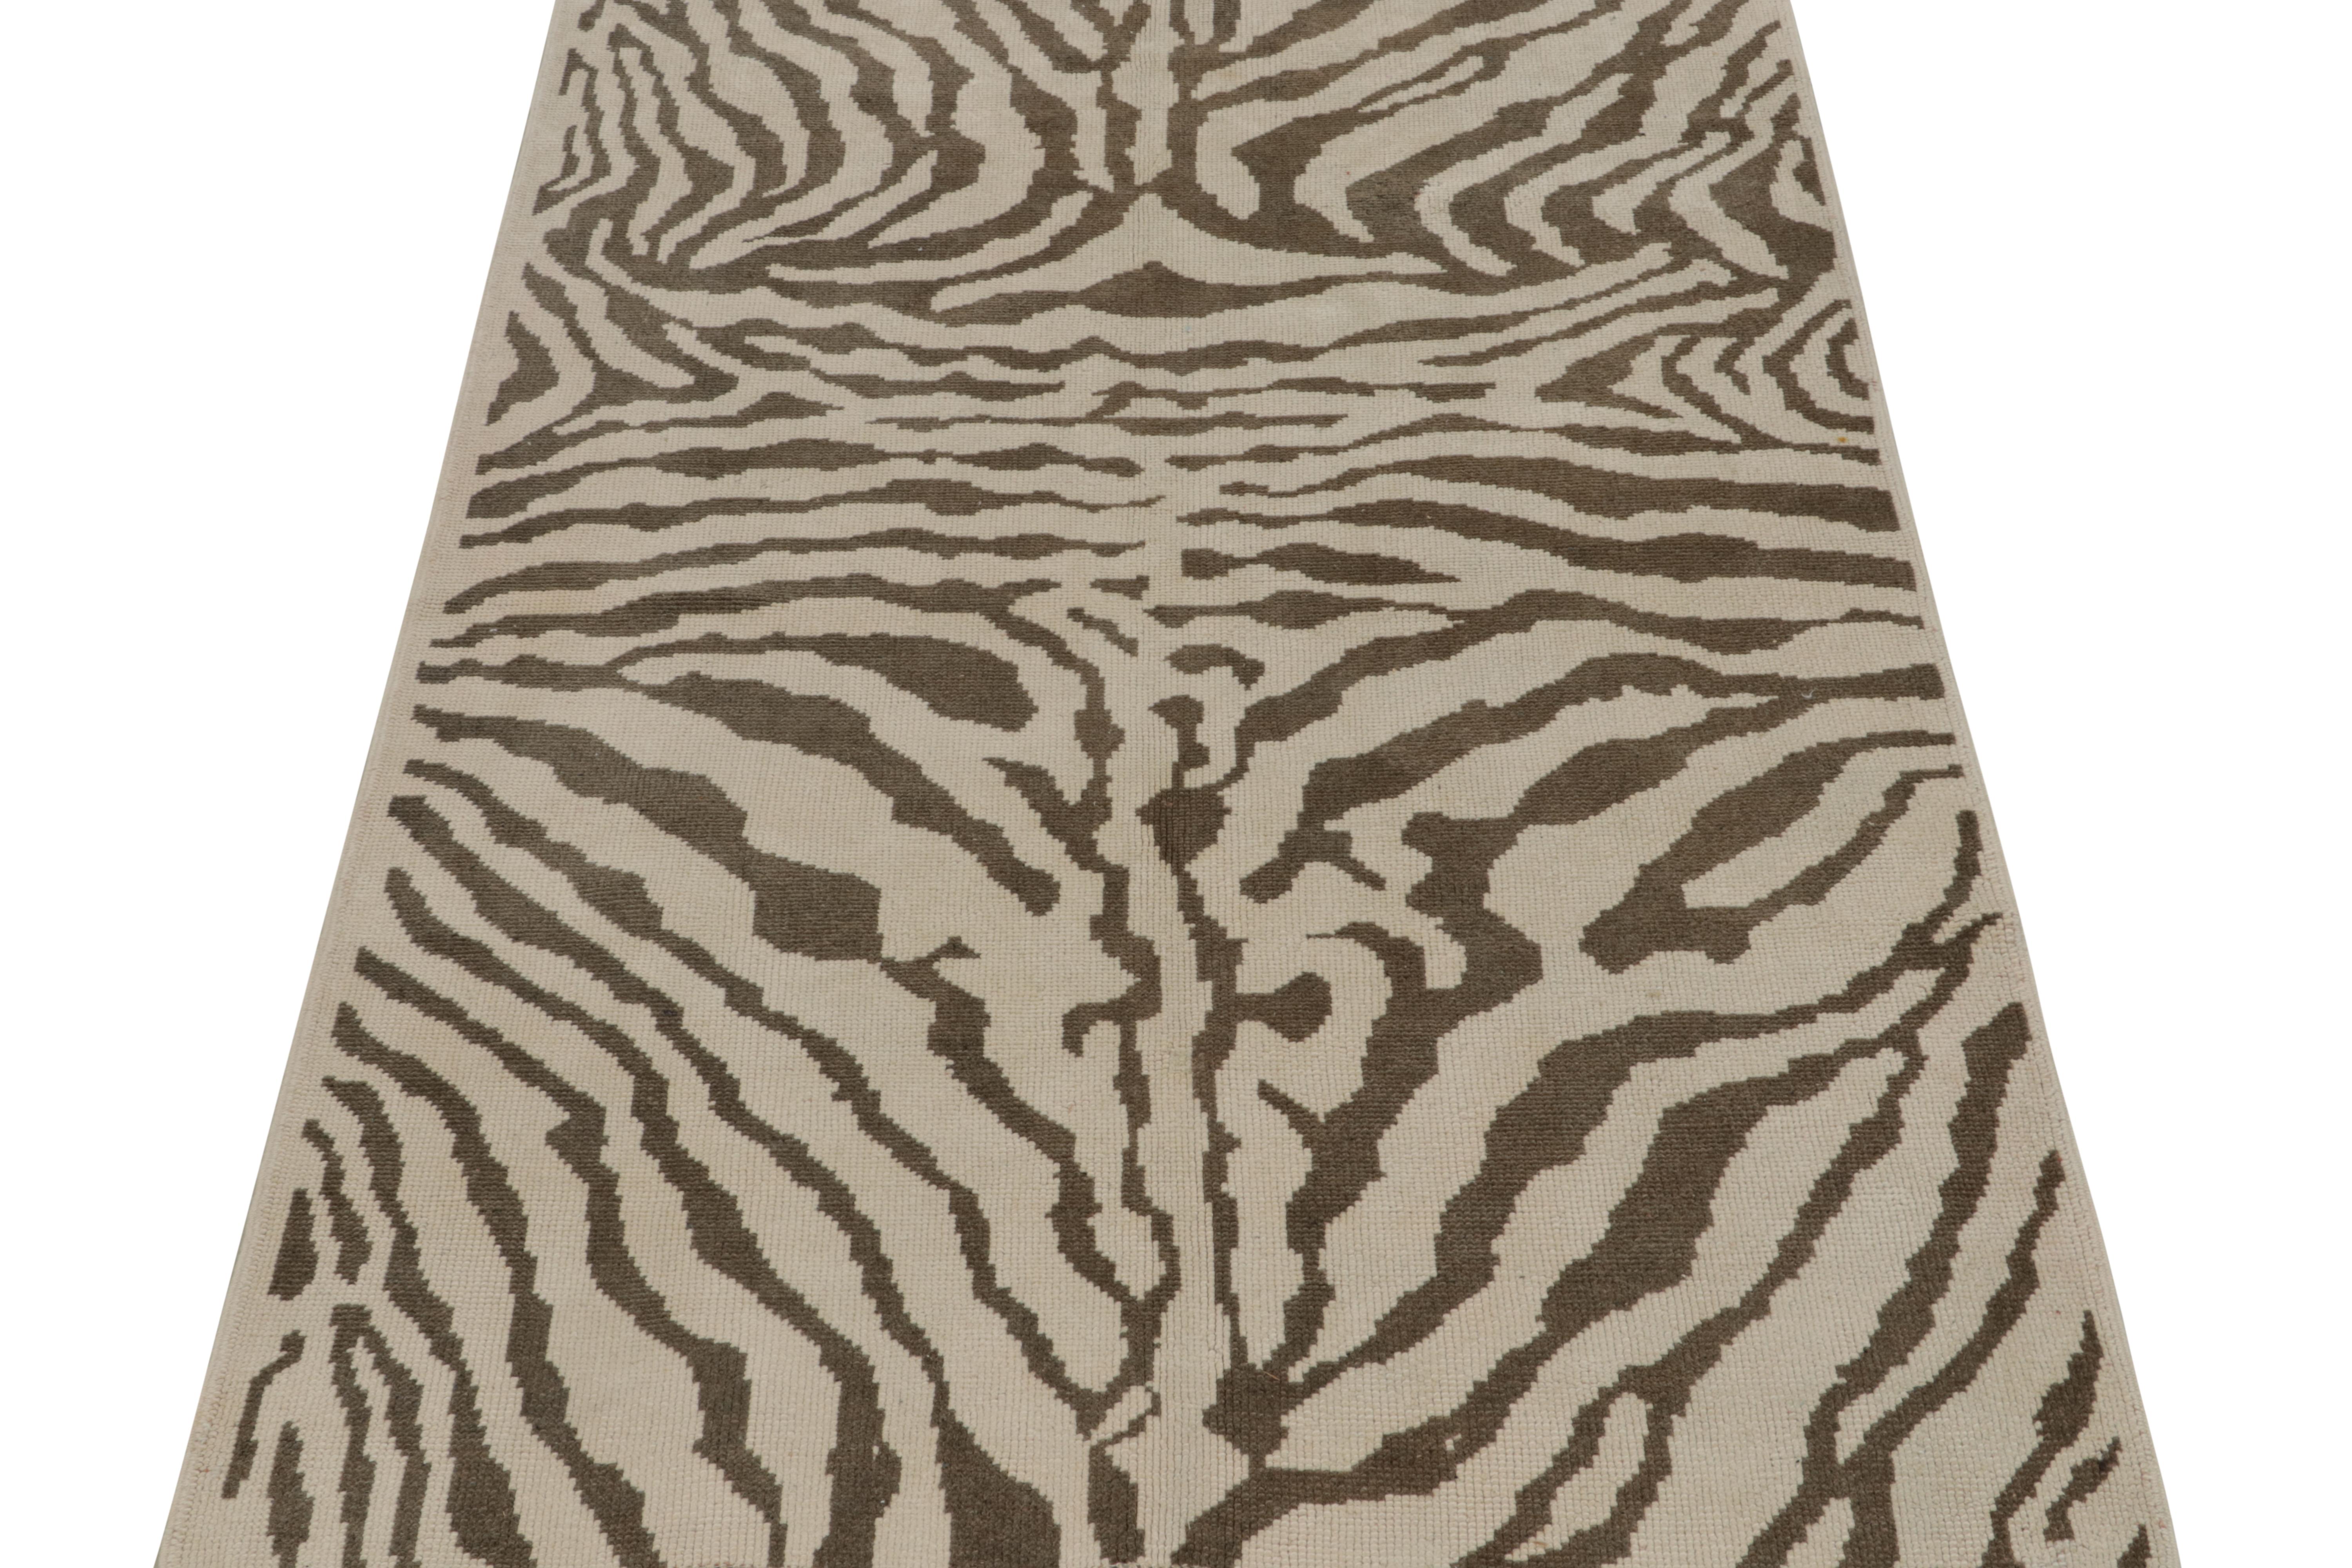 Tribal Vintage Tiger Skin Style Rug in Taupe with Brown Pattern, by Rug & Kilim For Sale